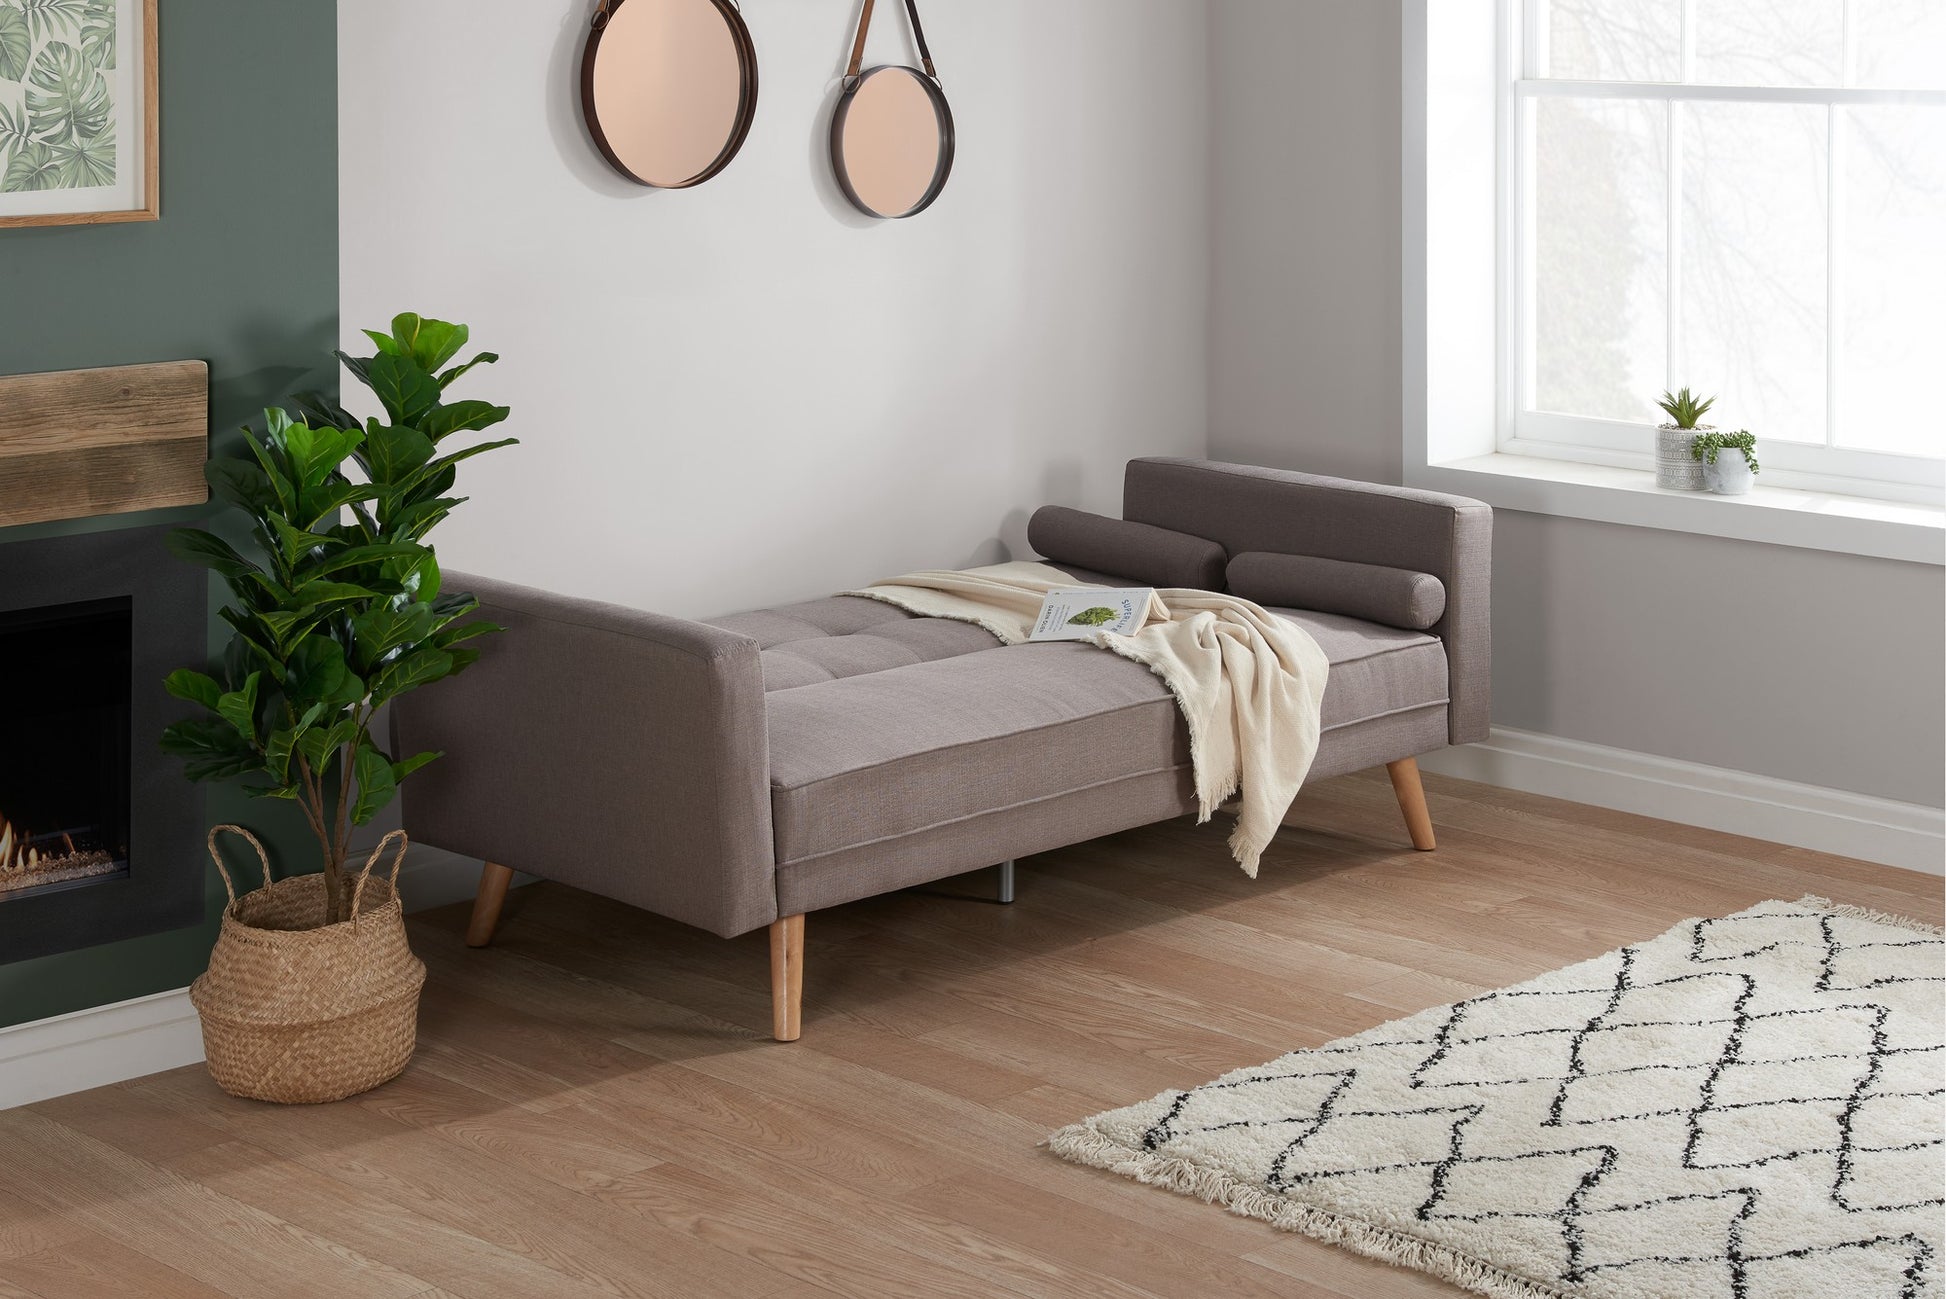 Birlea Ethan Large Sofa Bed: Modern, Stylish, Retro Feel with Contrasting Buttoned Details, Ideal for Occasional Guest Bed